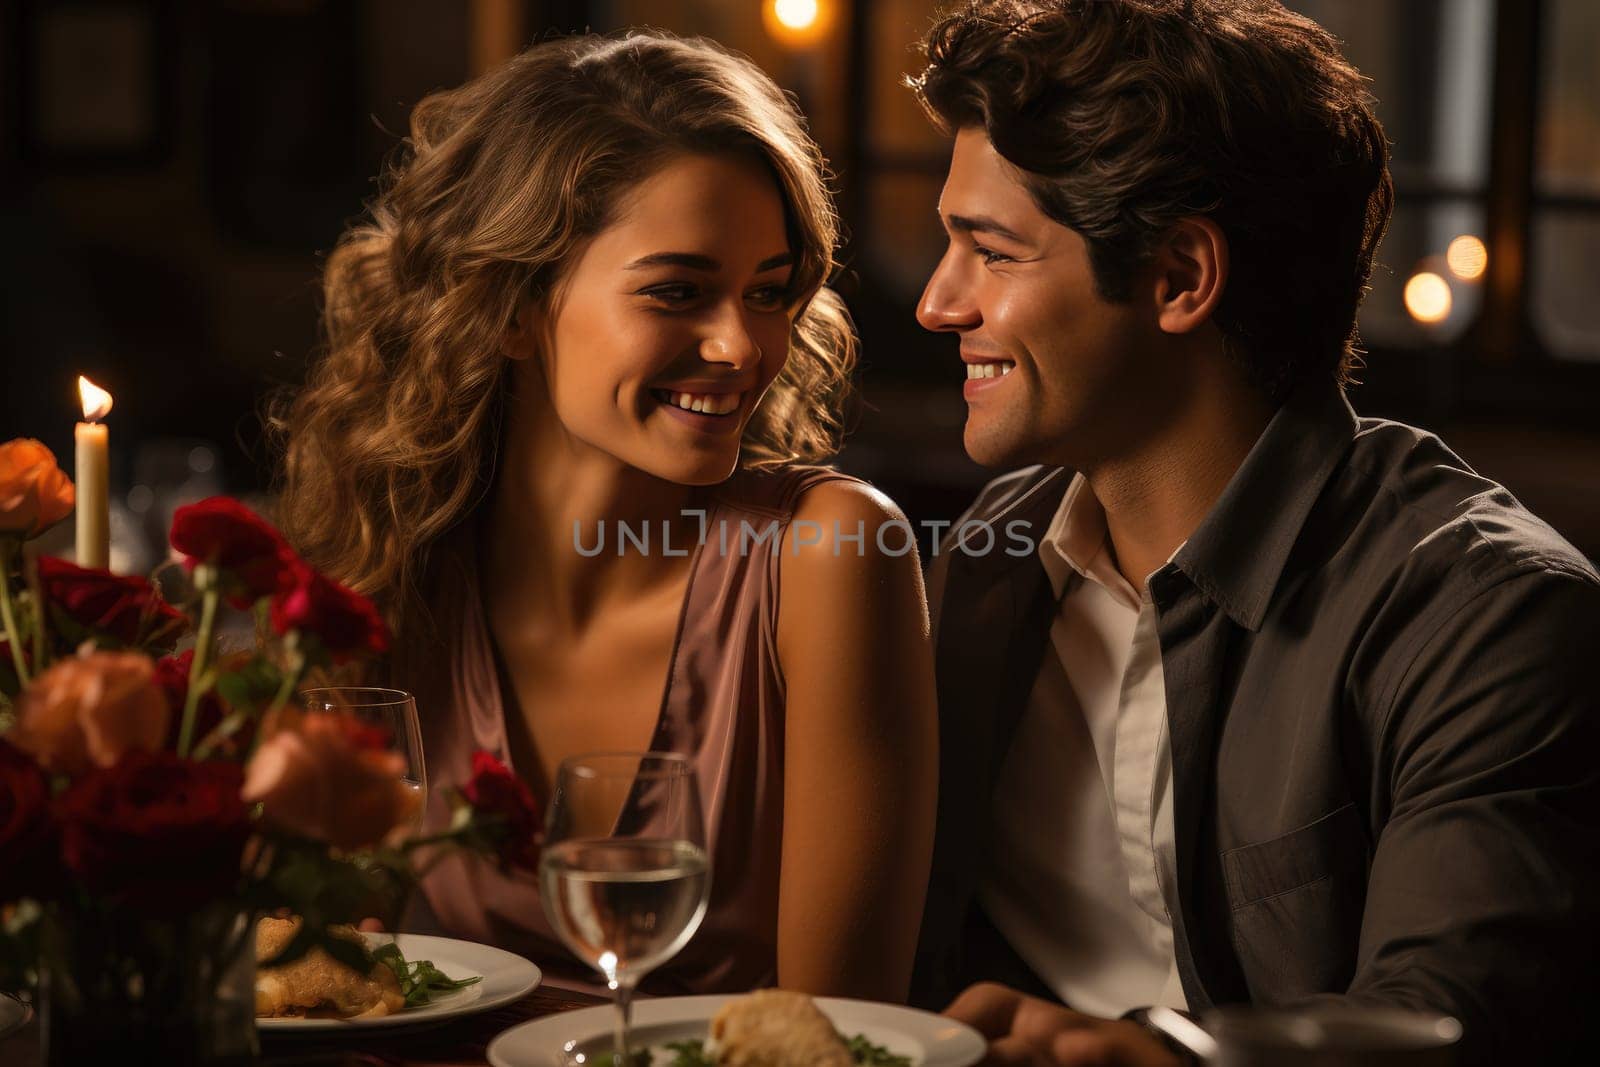 Source of Happiness: A Woman Throws a Romantic Valentine's Day Dinner for Her Husband by Yurich32